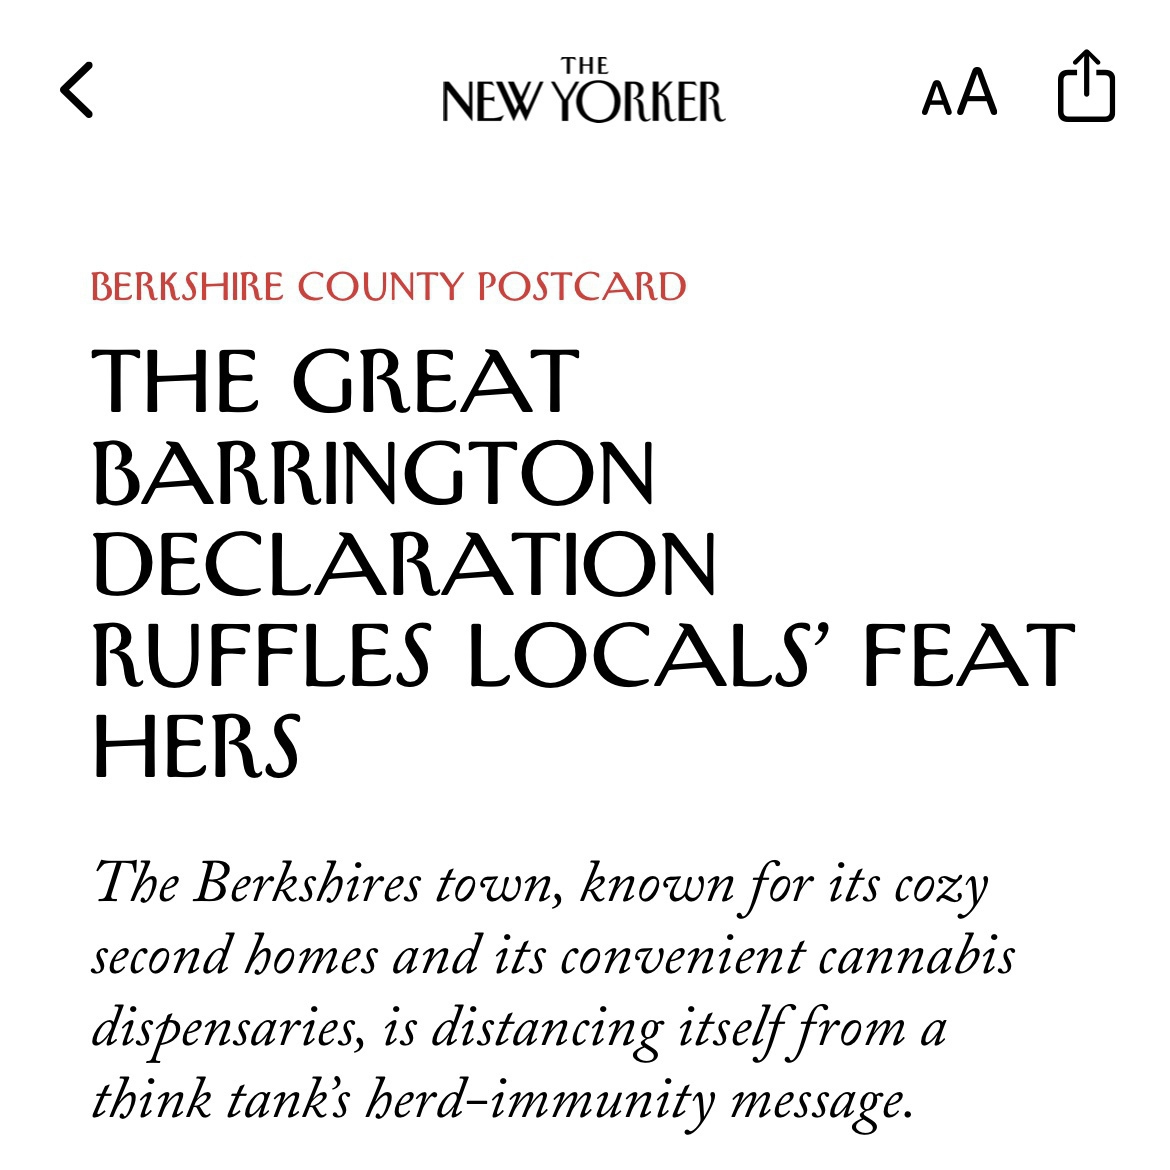 New Yorker article from iPhone with headline: THE GREAT BARRINGTON DECLARATION RUFFLES LOCALS’ FEAT HERS